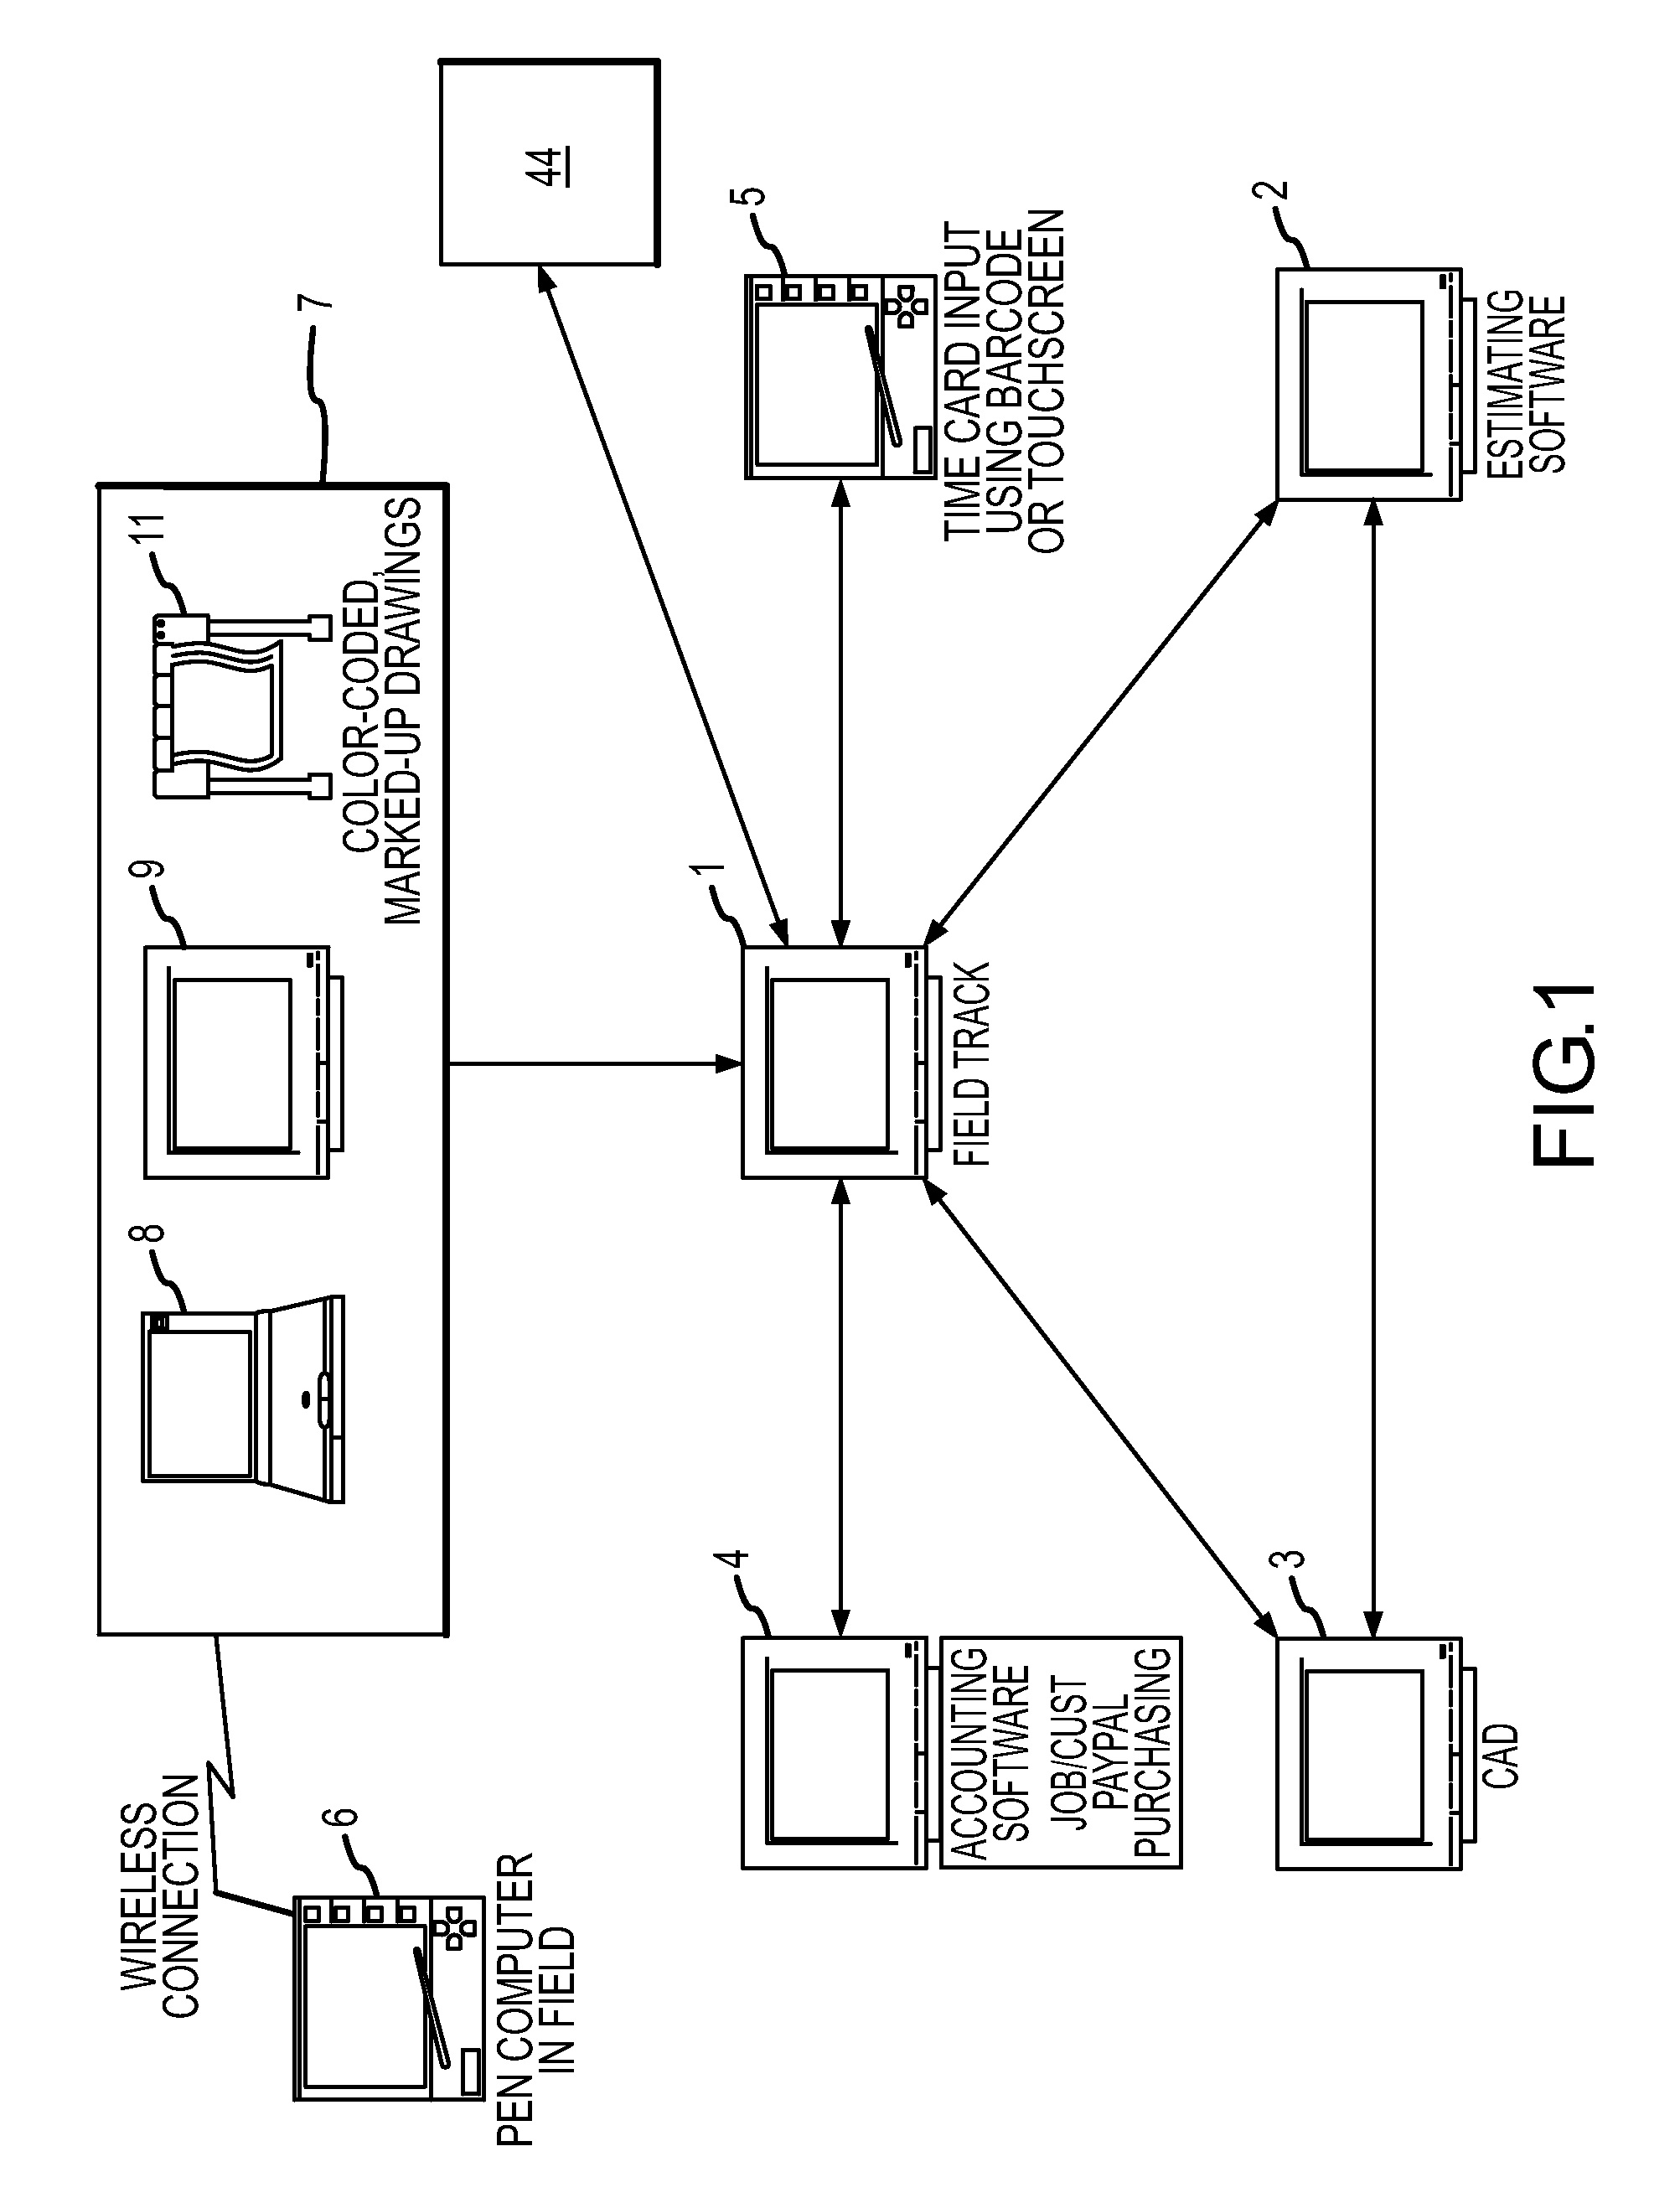 System And Method For Tracking And Managing Construction Projects